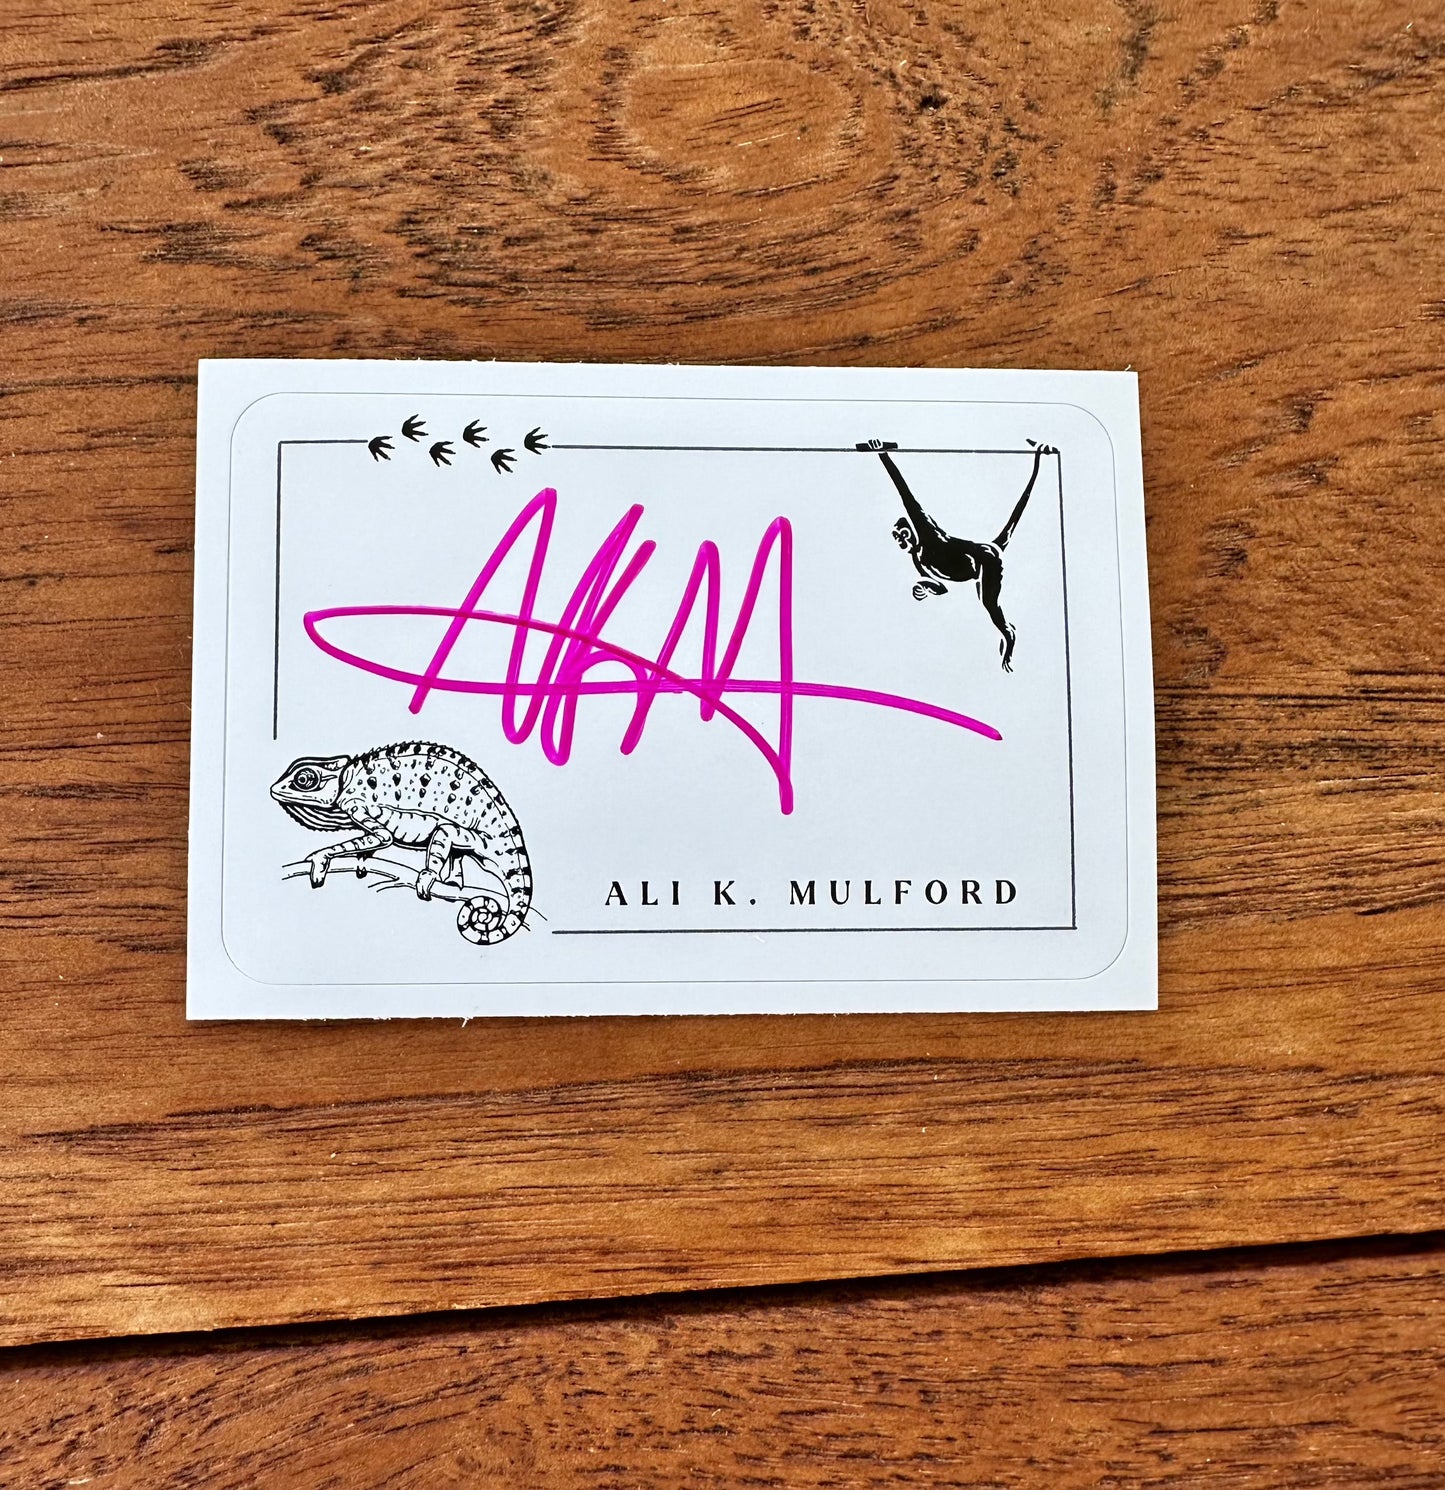 Ali K. Mulford Signed Book Plate With Swag